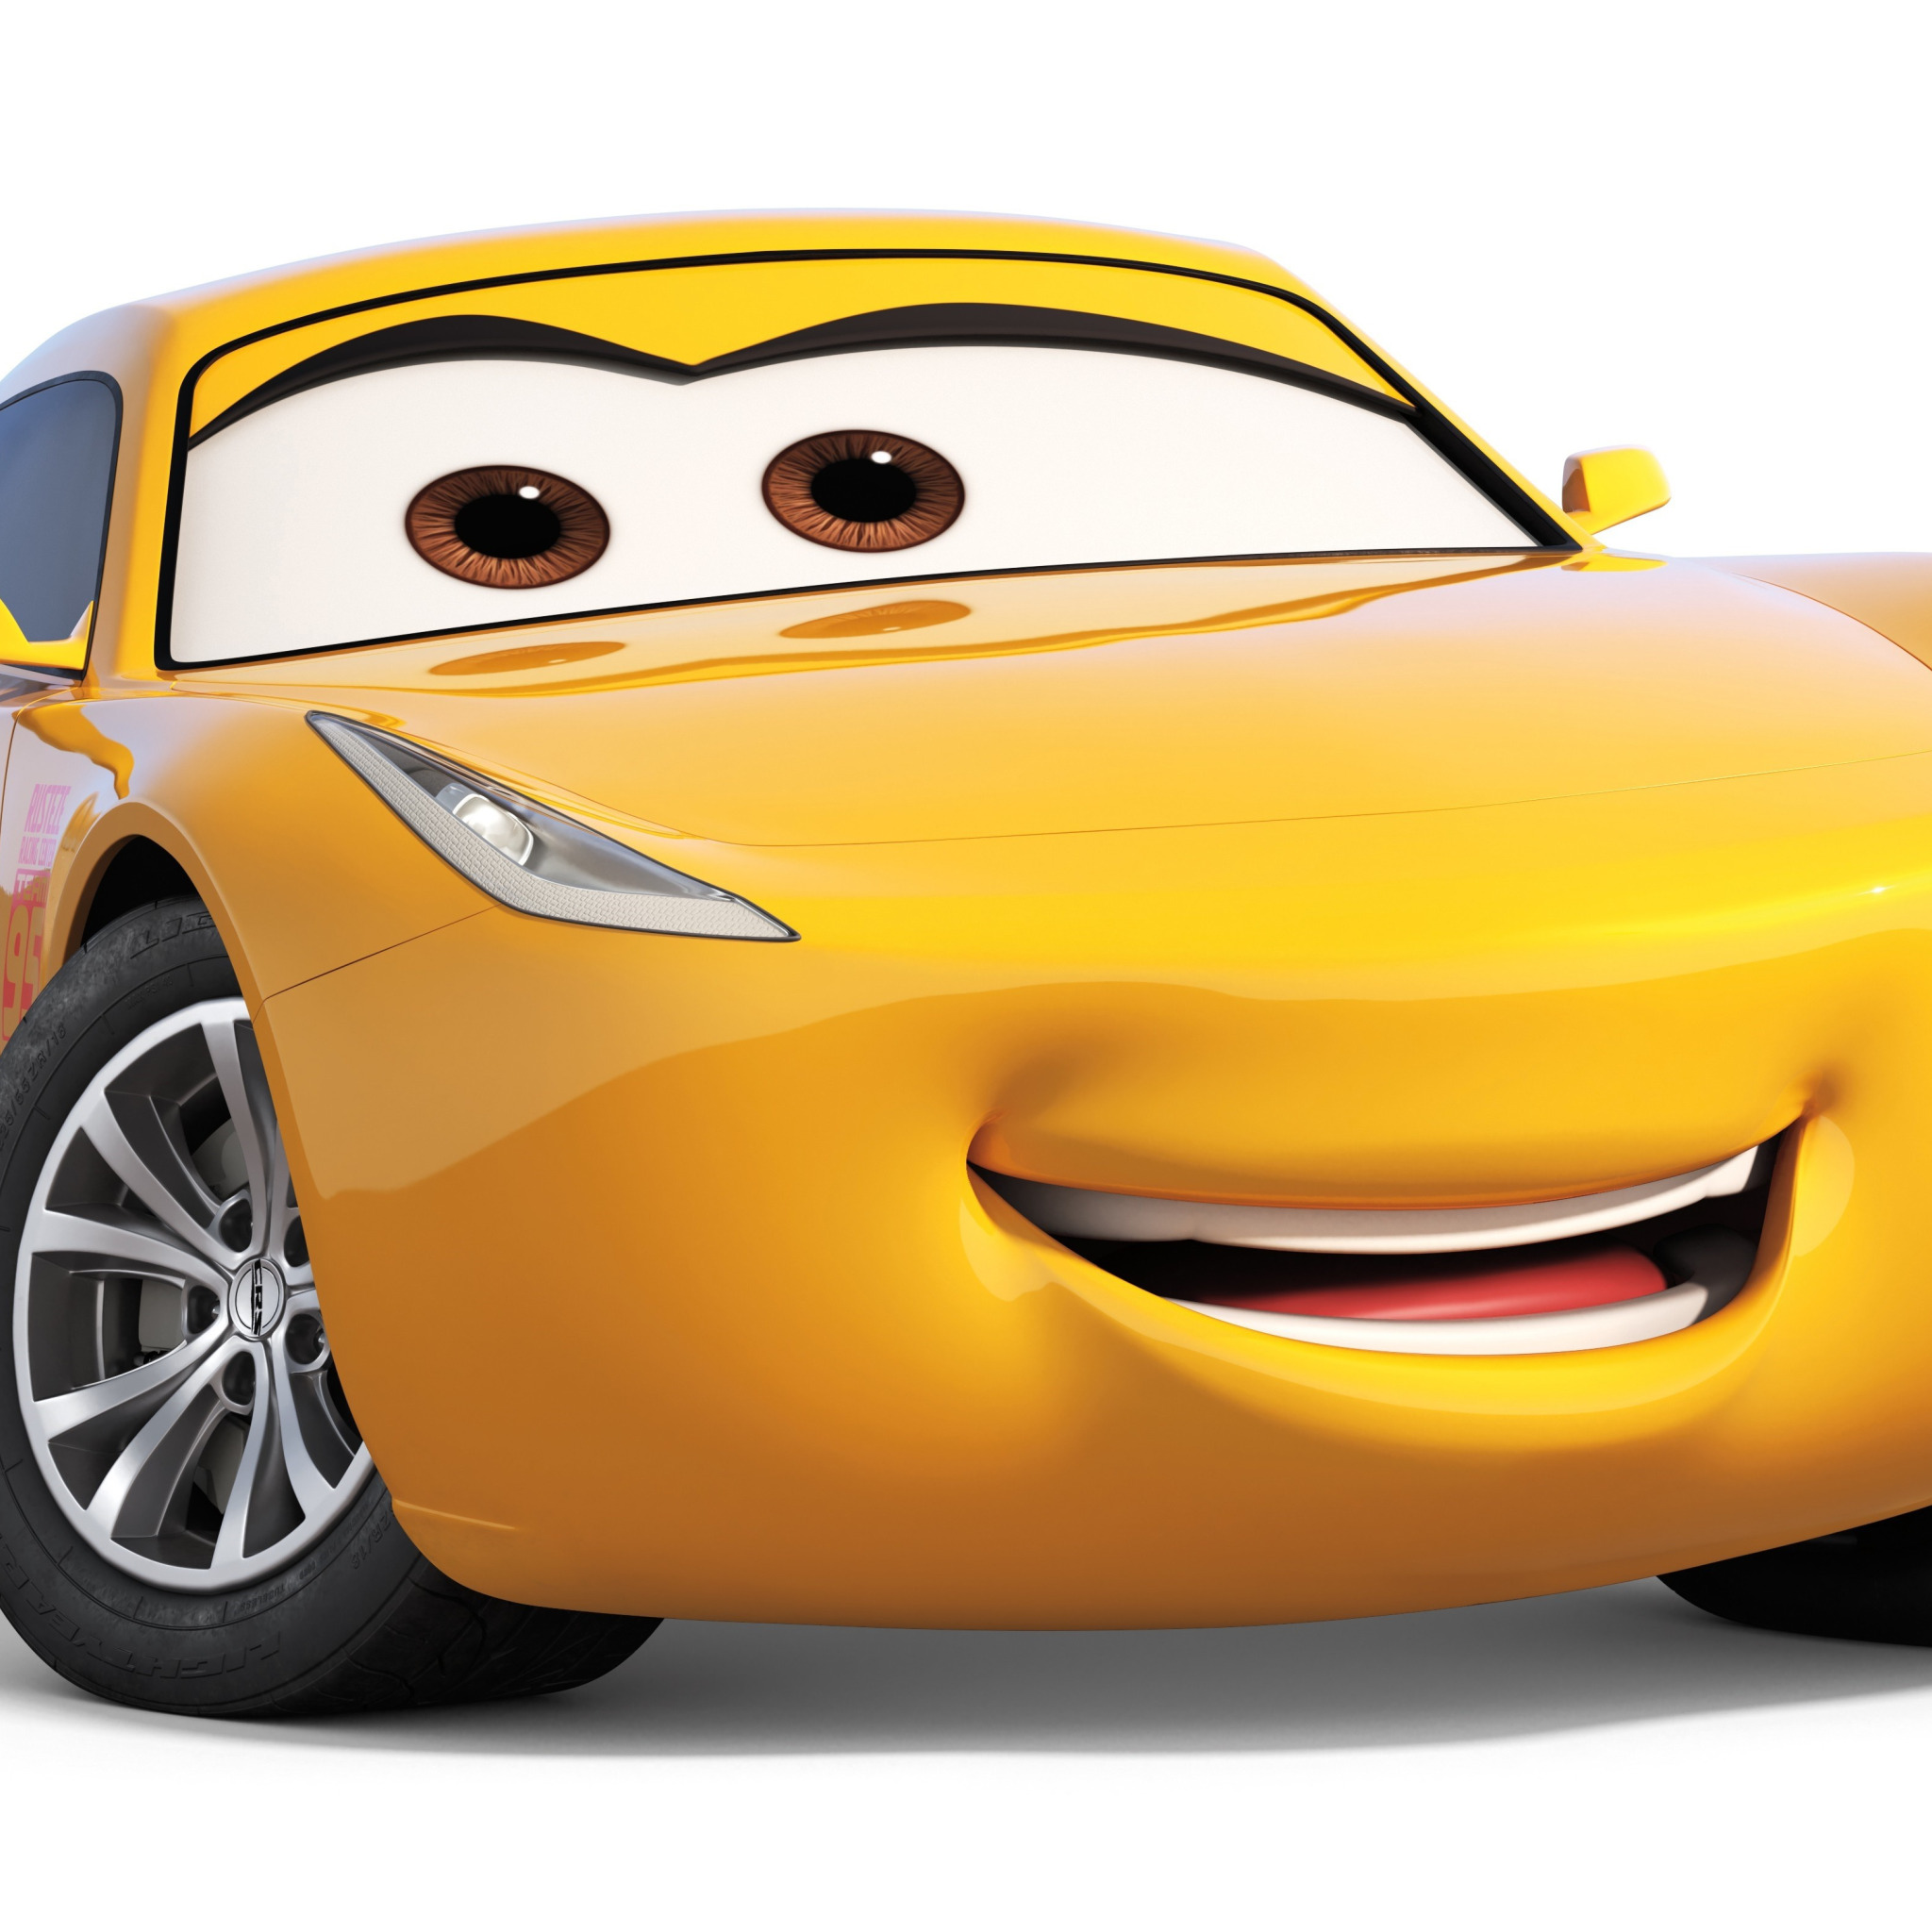 Download wallpaper car, Disney, Pixar, Cars, yellow, animated film,  animated movie, Cars 3, section films in resolution 2048x2048